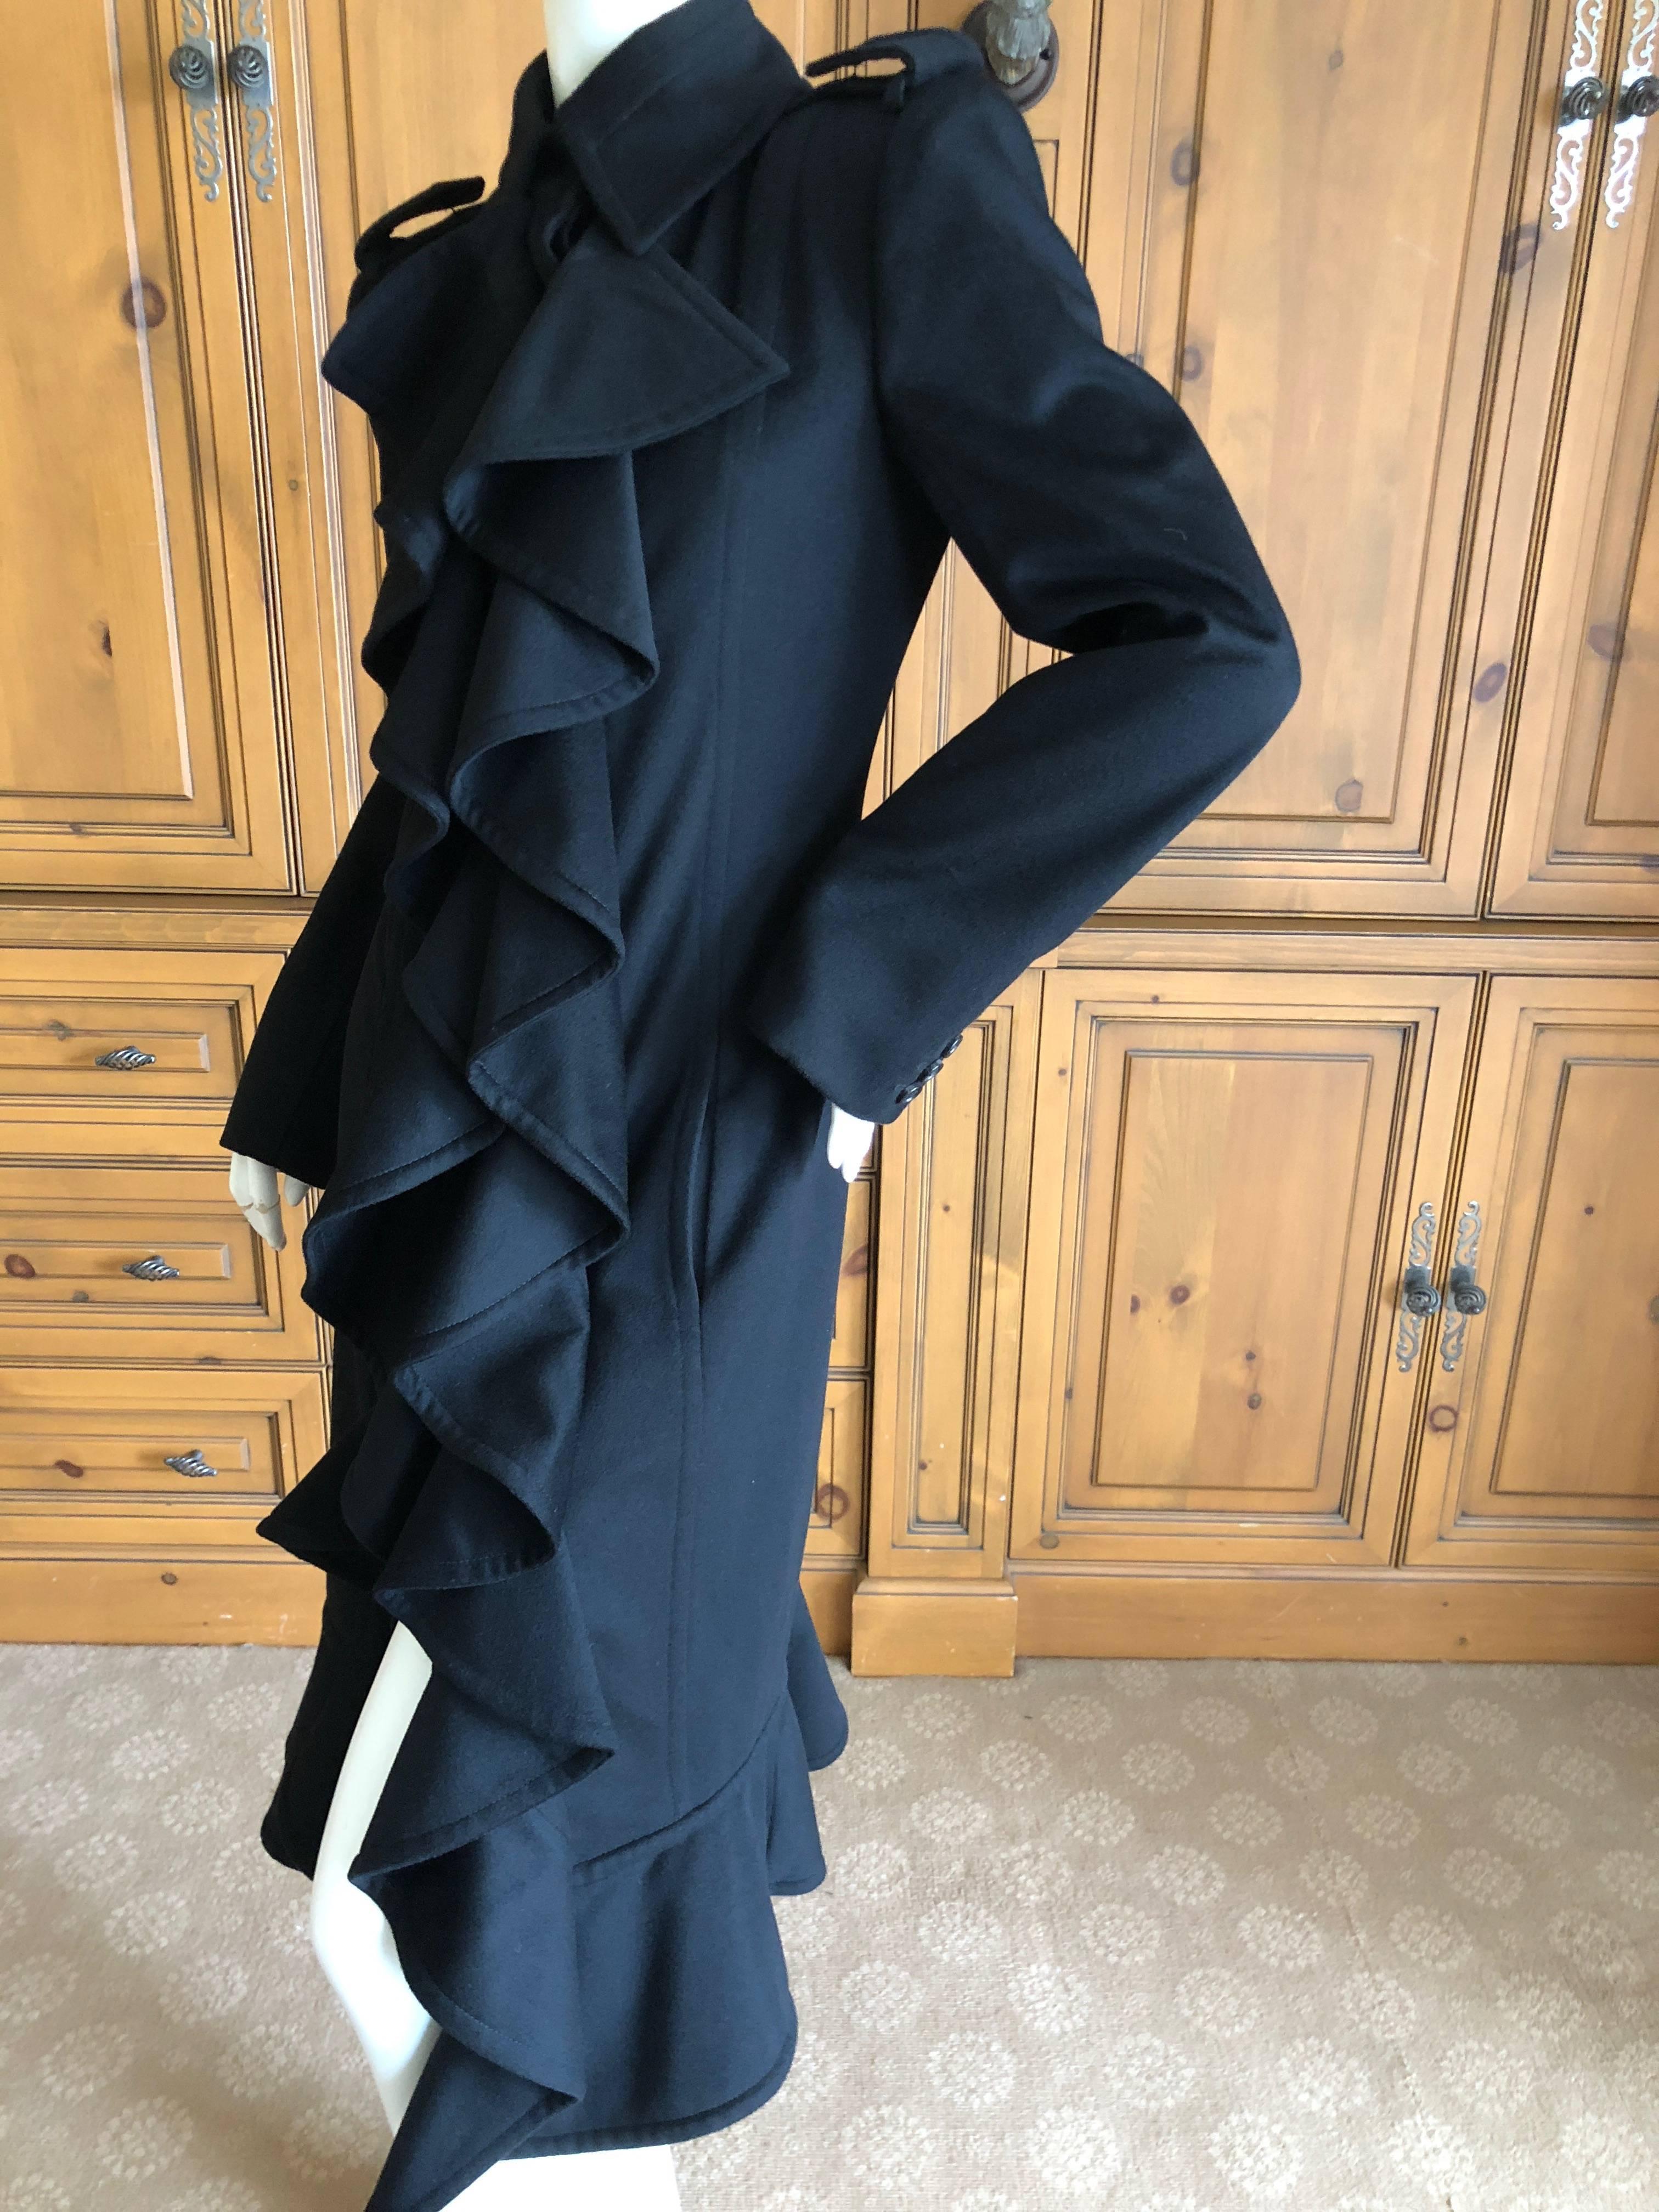 Yves Saint Laurent by Tom Ford Black Wool Ruffle Front Coat from Fall 2004 For Sale 2